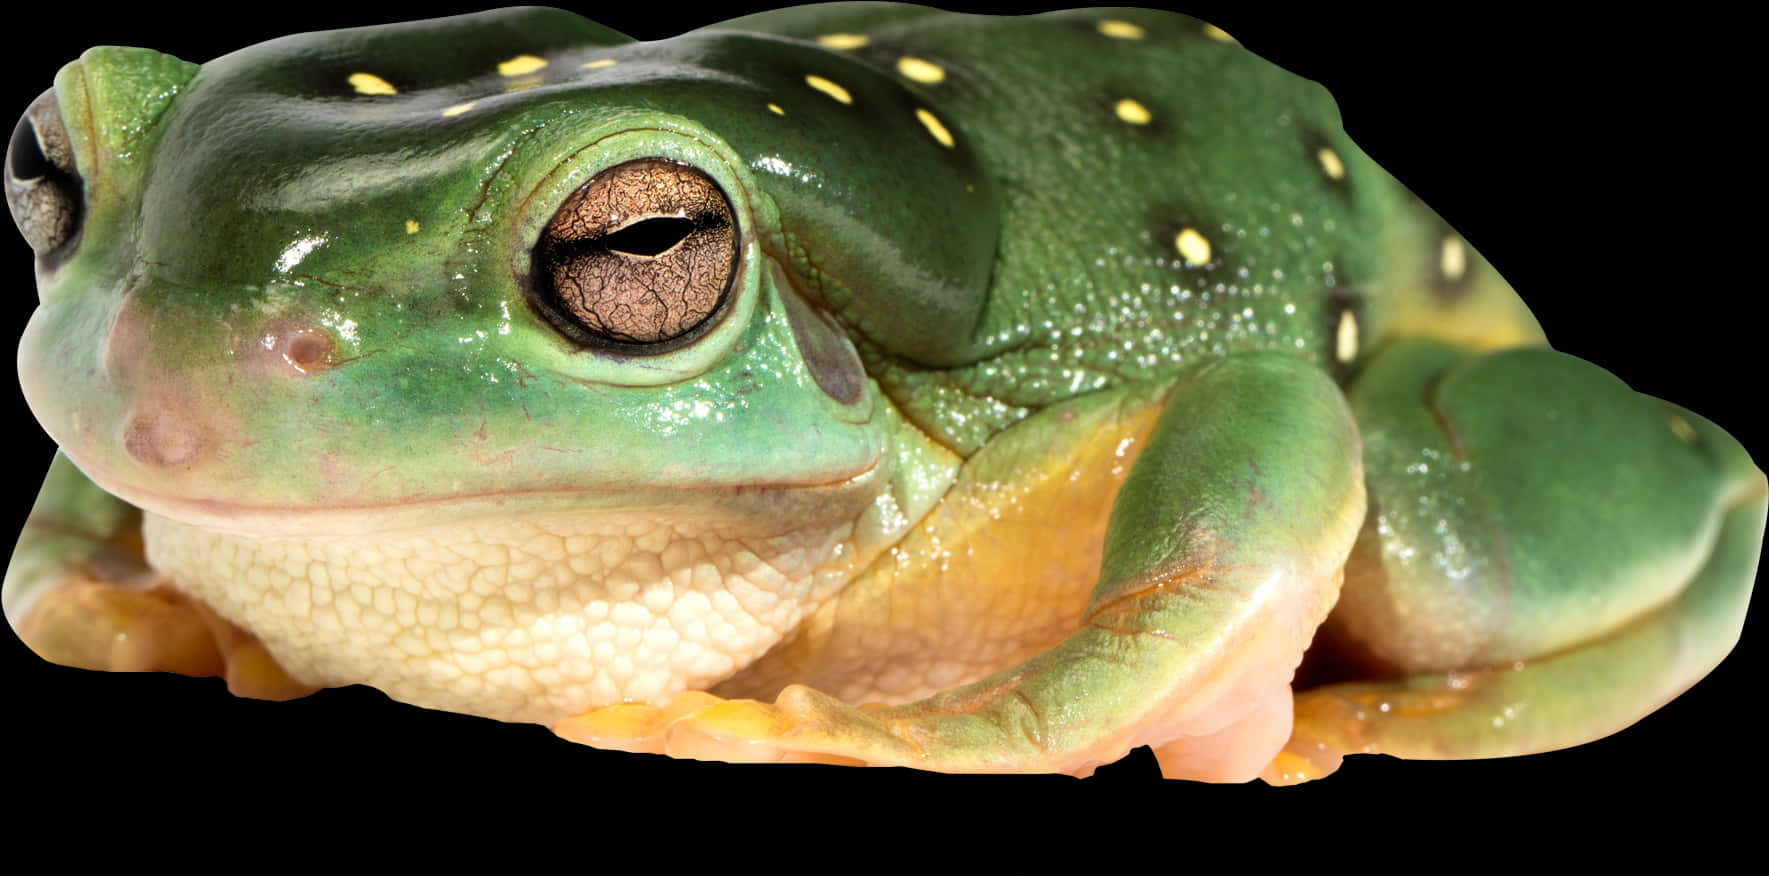 Green Spotted Frog Closeup.jpg PNG